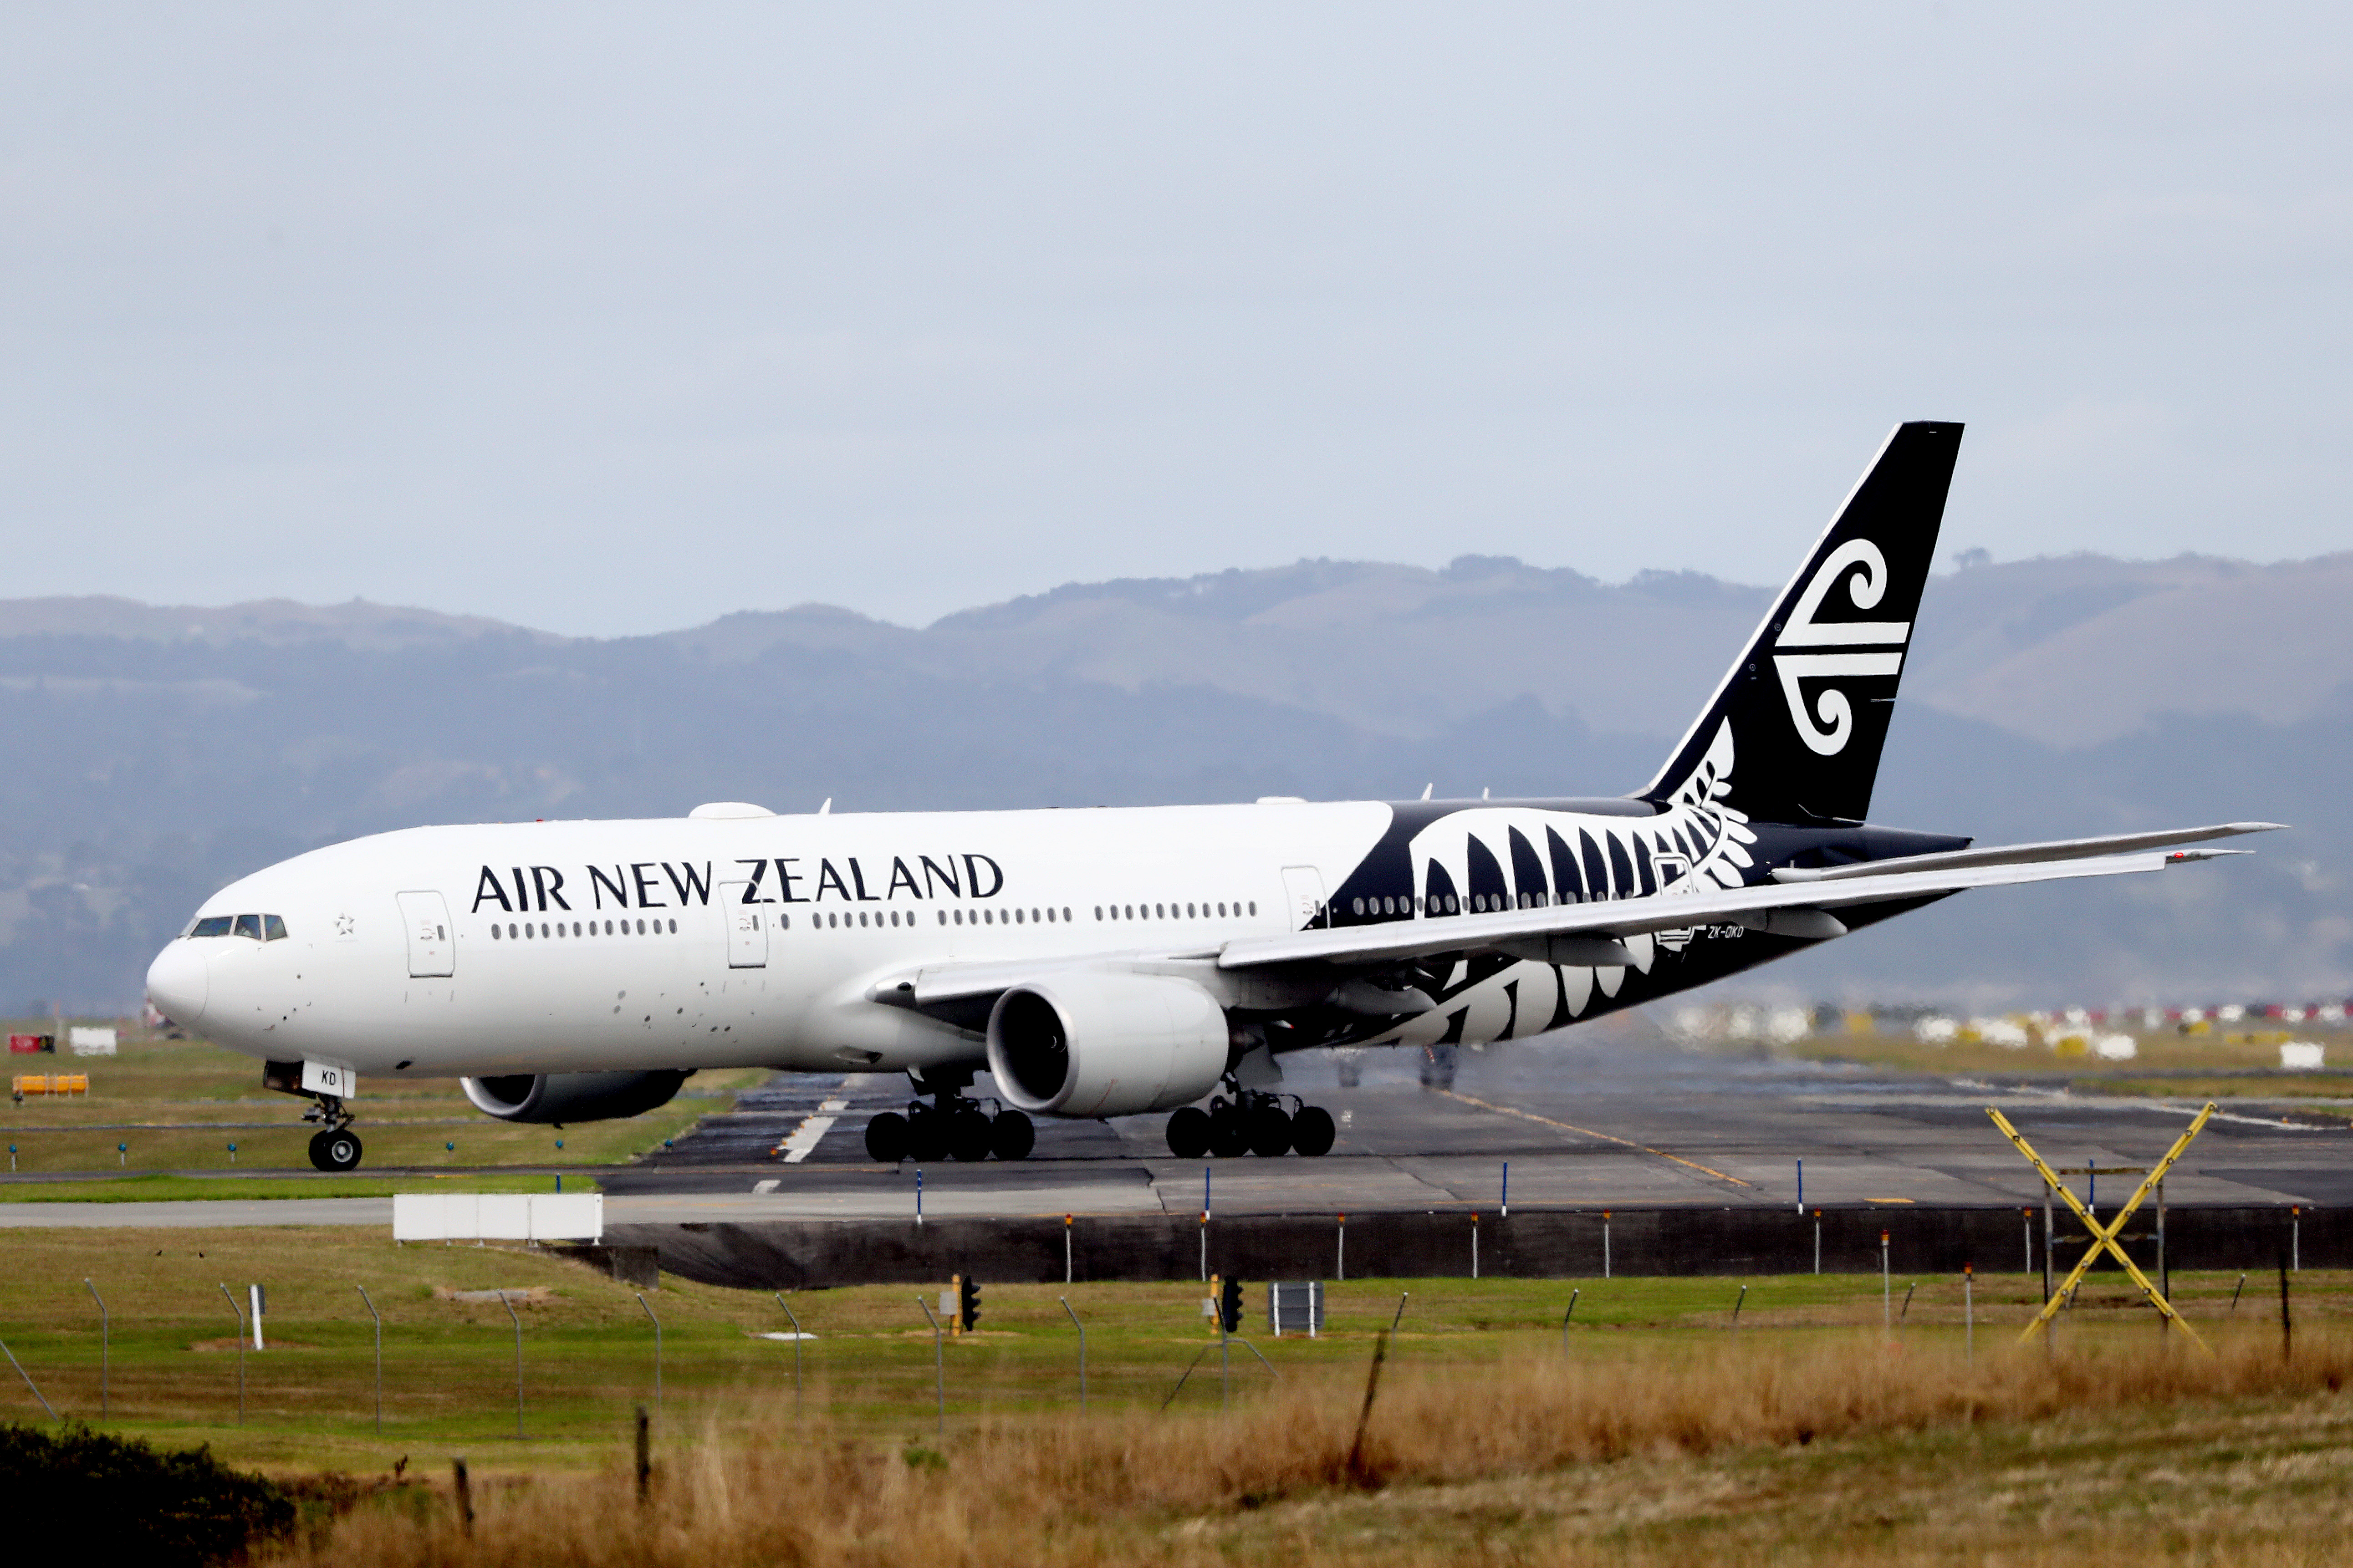  An Air New Zealand plane is seen at Auckland Airport in New Zealand on Monday. 